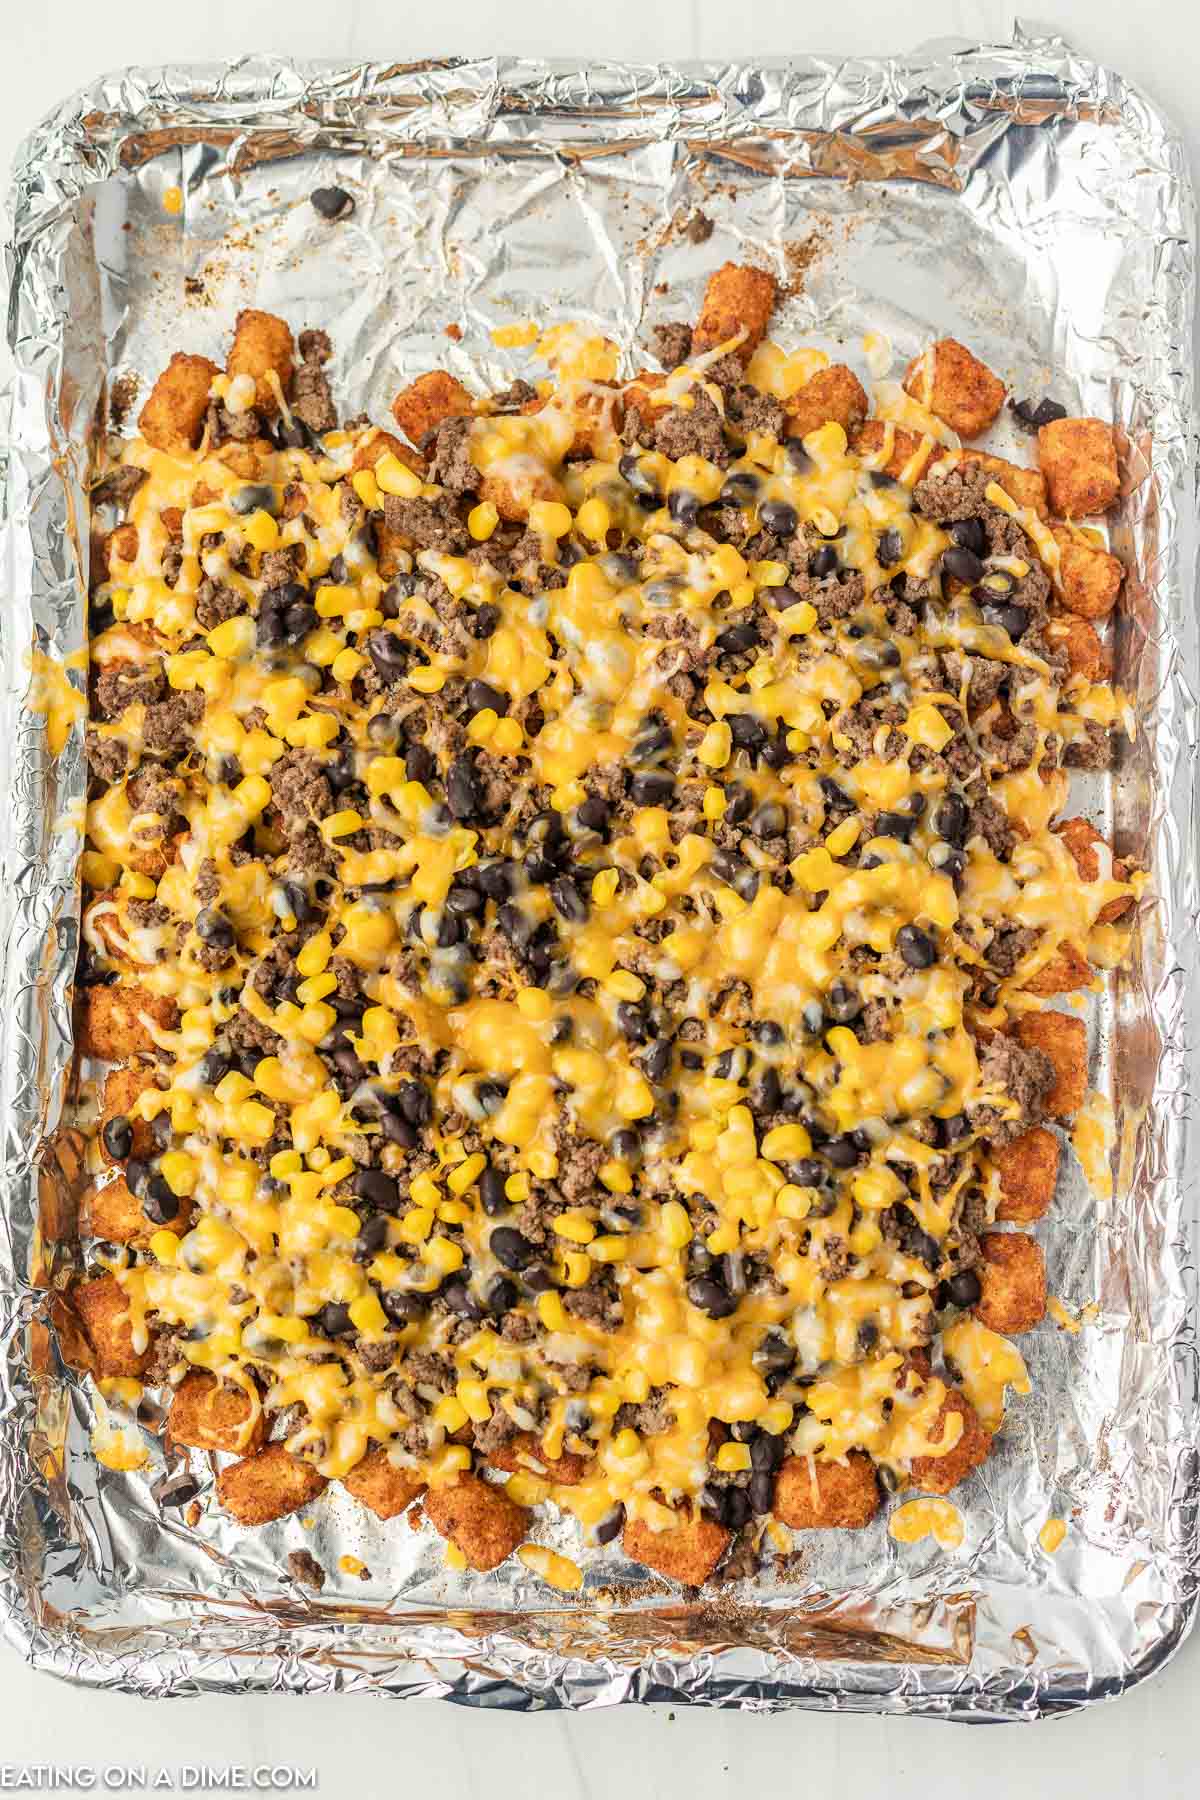 Top the tator tots with cheese, beans, corn